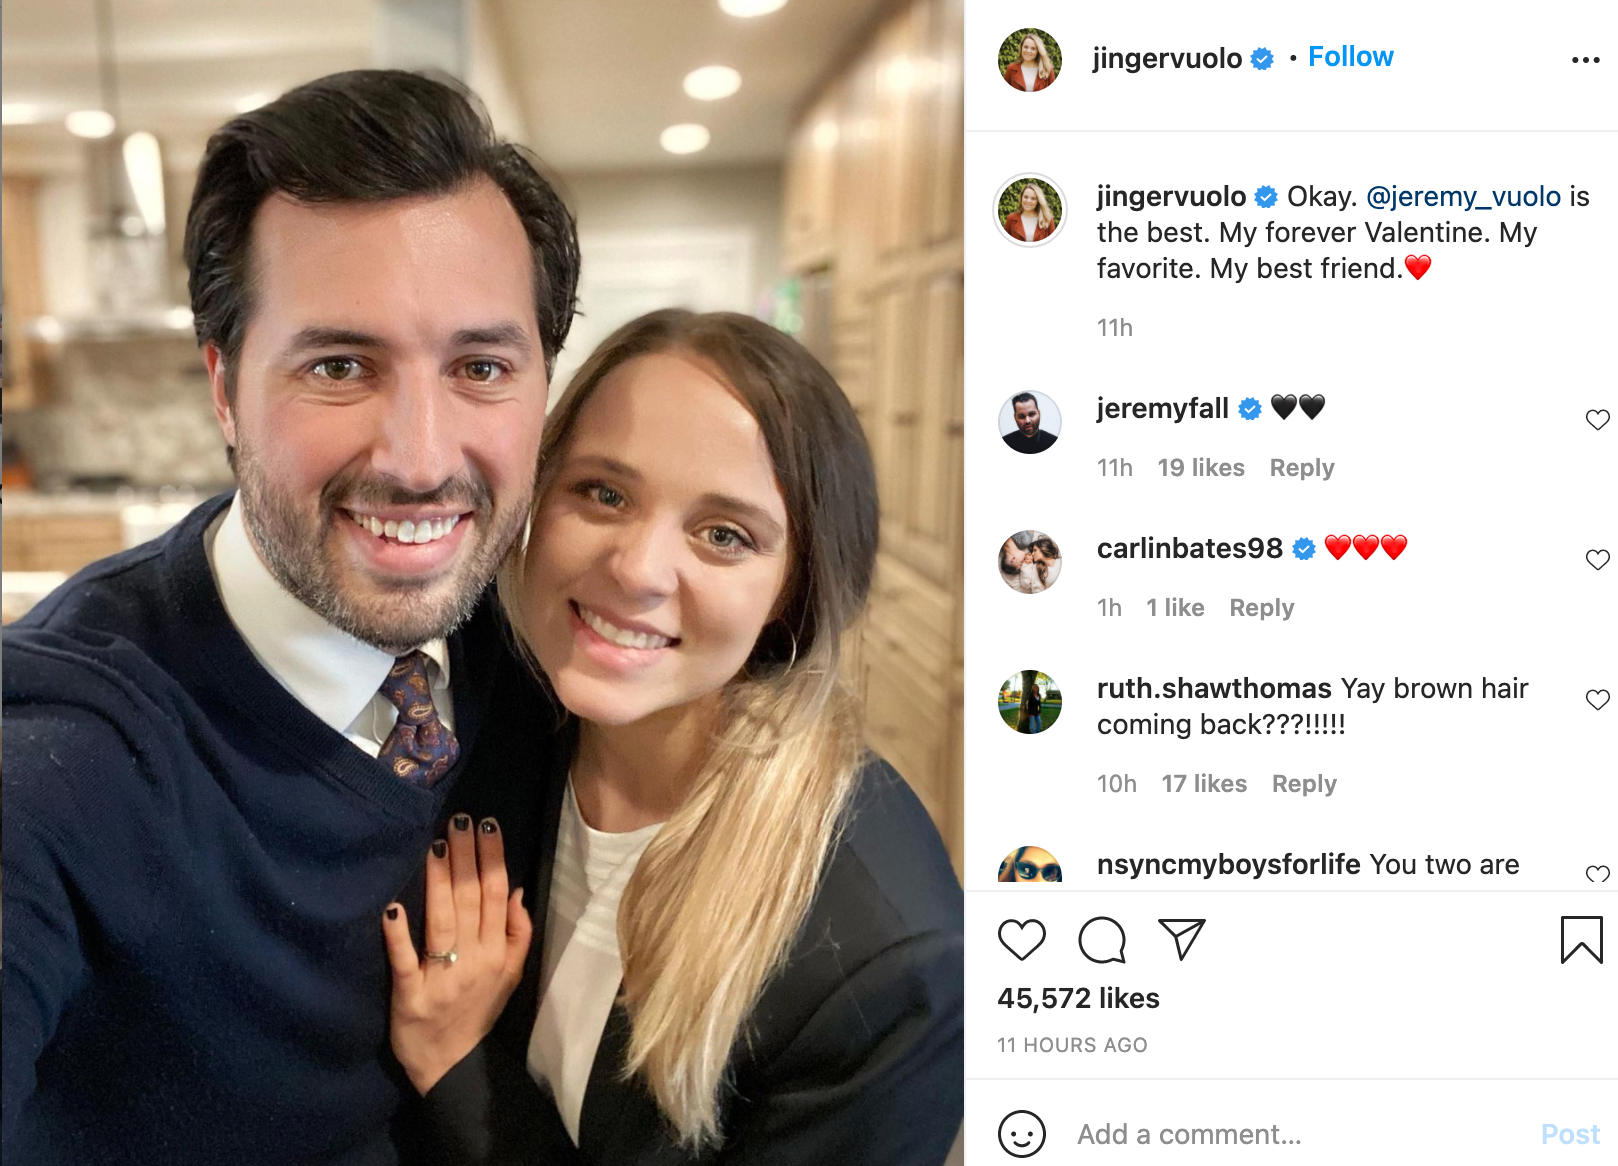 2. How to Achieve Jinger Vuolo's Blonde Hair Look - wide 4